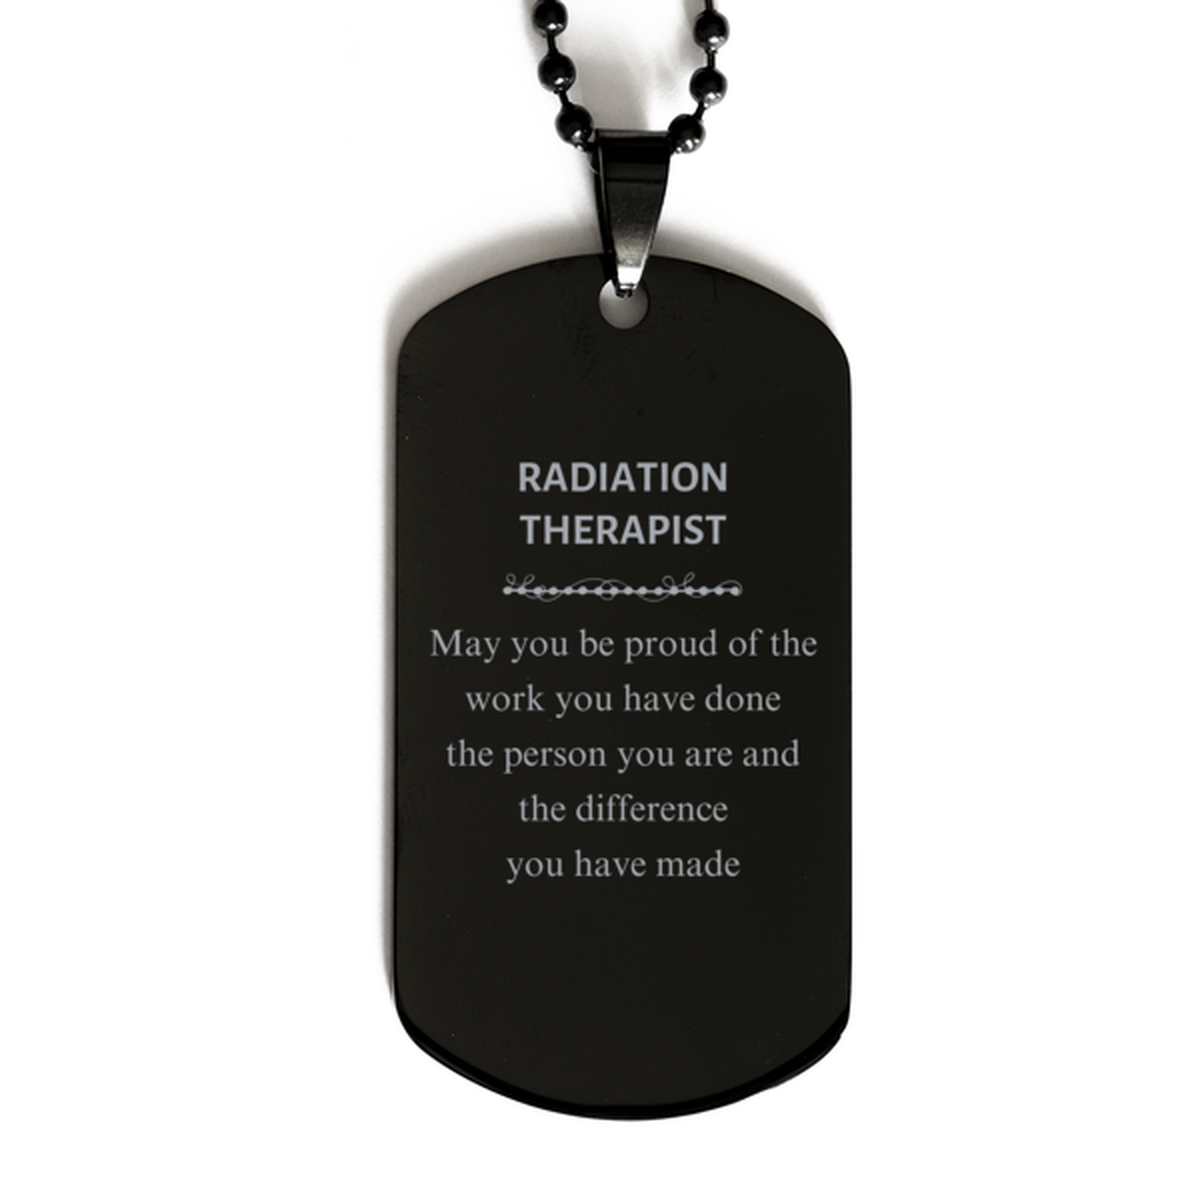 Radiation Therapist May you be proud of the work you have done, Retirement Radiation Therapist Black Dog Tag for Colleague Appreciation Gifts Amazing for Radiation Therapist